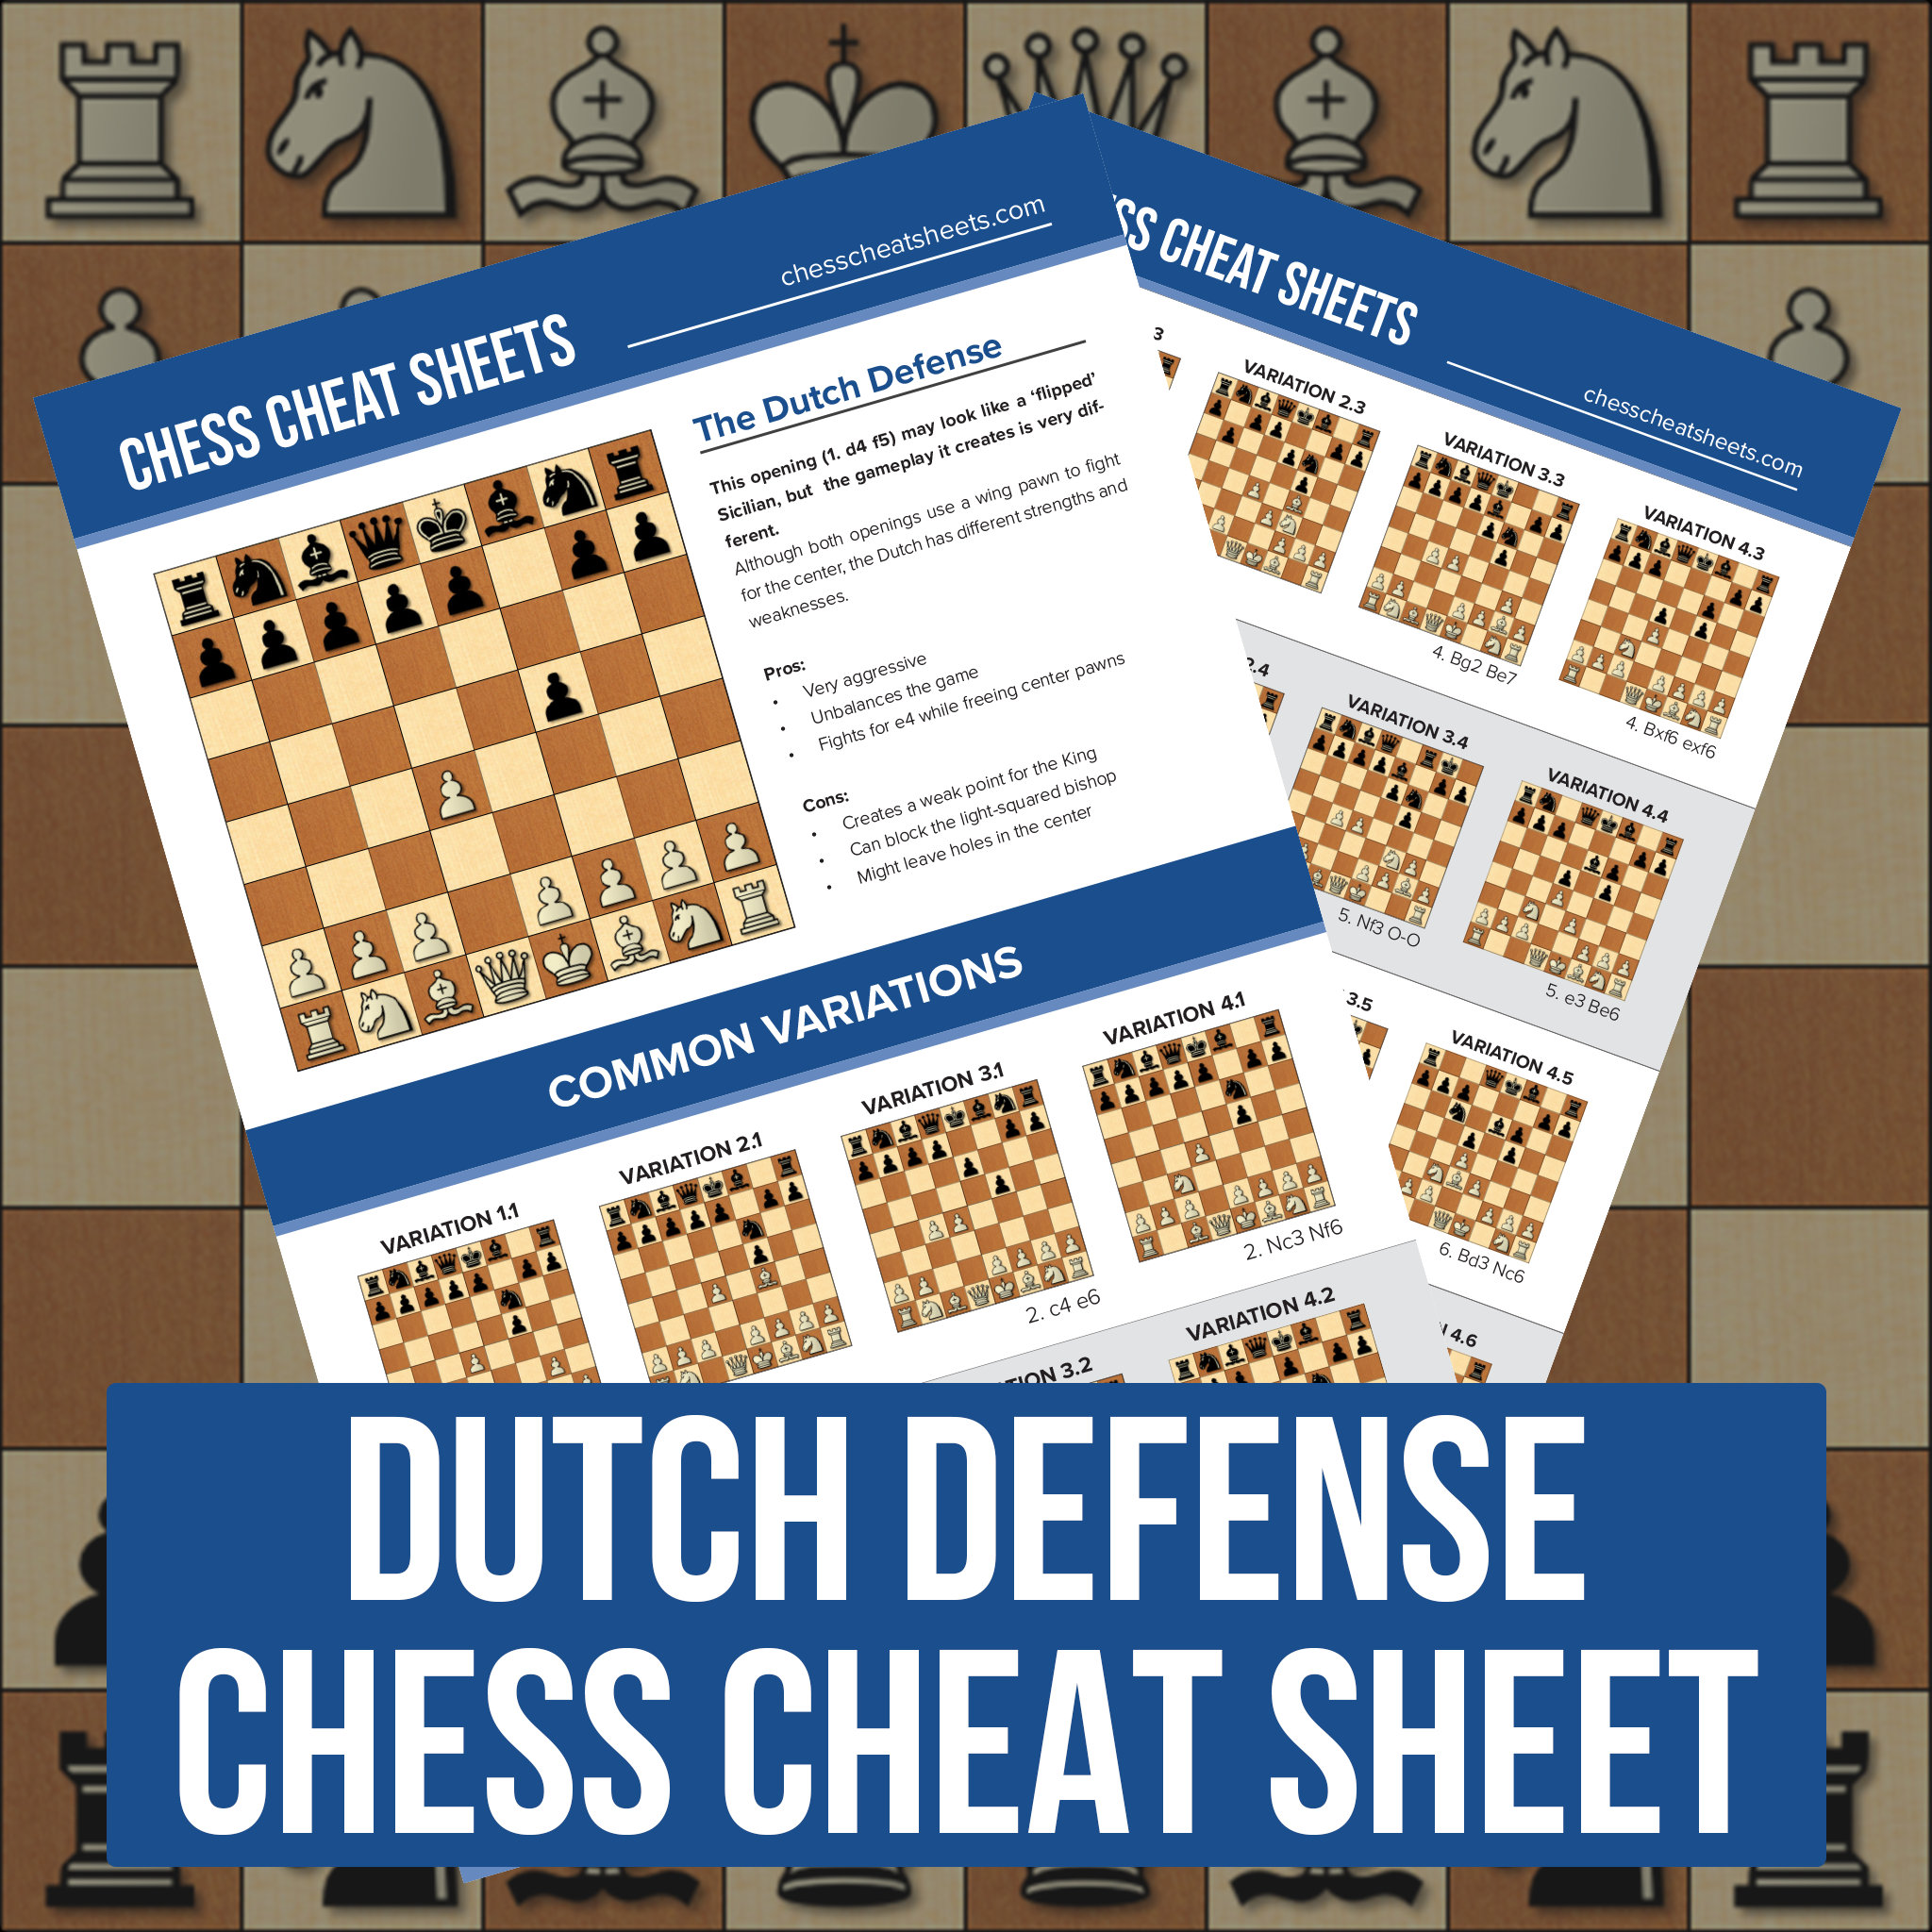 Learn The Alekhine's Defense - Chess Lessons 